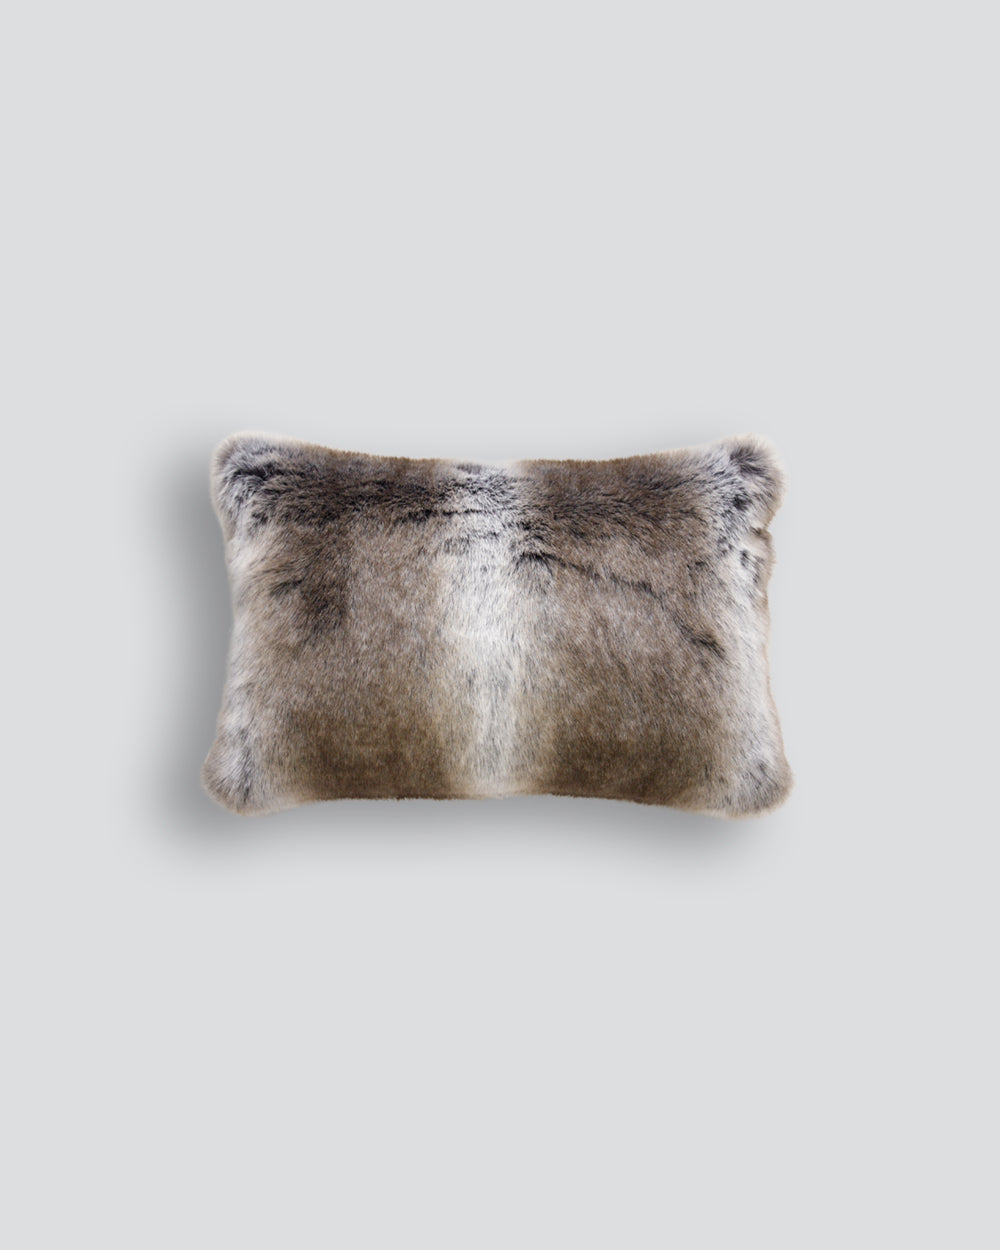 Heirloom Striped Elk Cushions in Faux Fur are available from Make Your House A Home Premium Stockist. Furniture Store Bendigo, Victoria. Australia Wide Delivery. Furtex Baya.